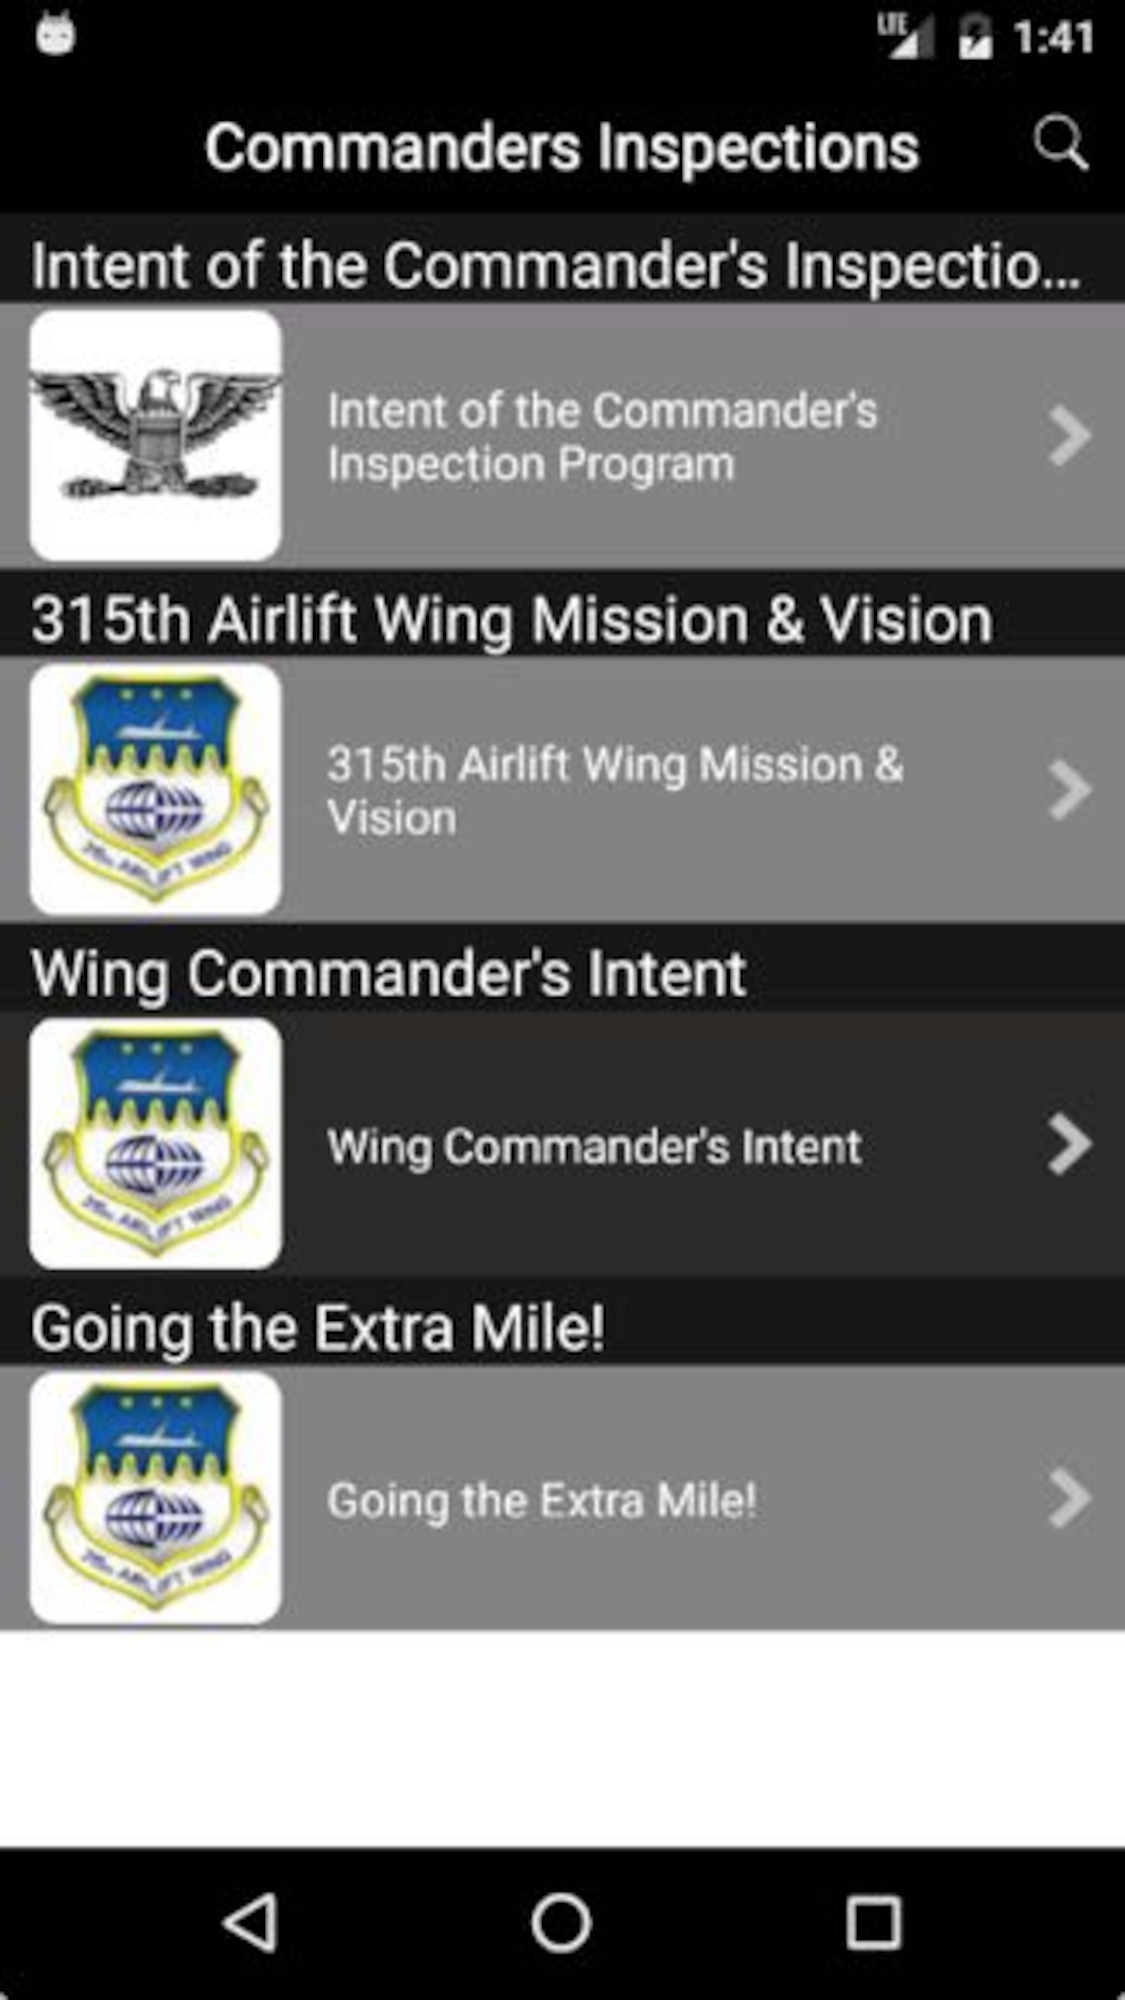 The 315th Airlift Wing mobile app puts the wing mission and vision at your finger tips. This can be particularly helpful during unit inspections. (U.S. Air Force Graphic / Michael Dukes)